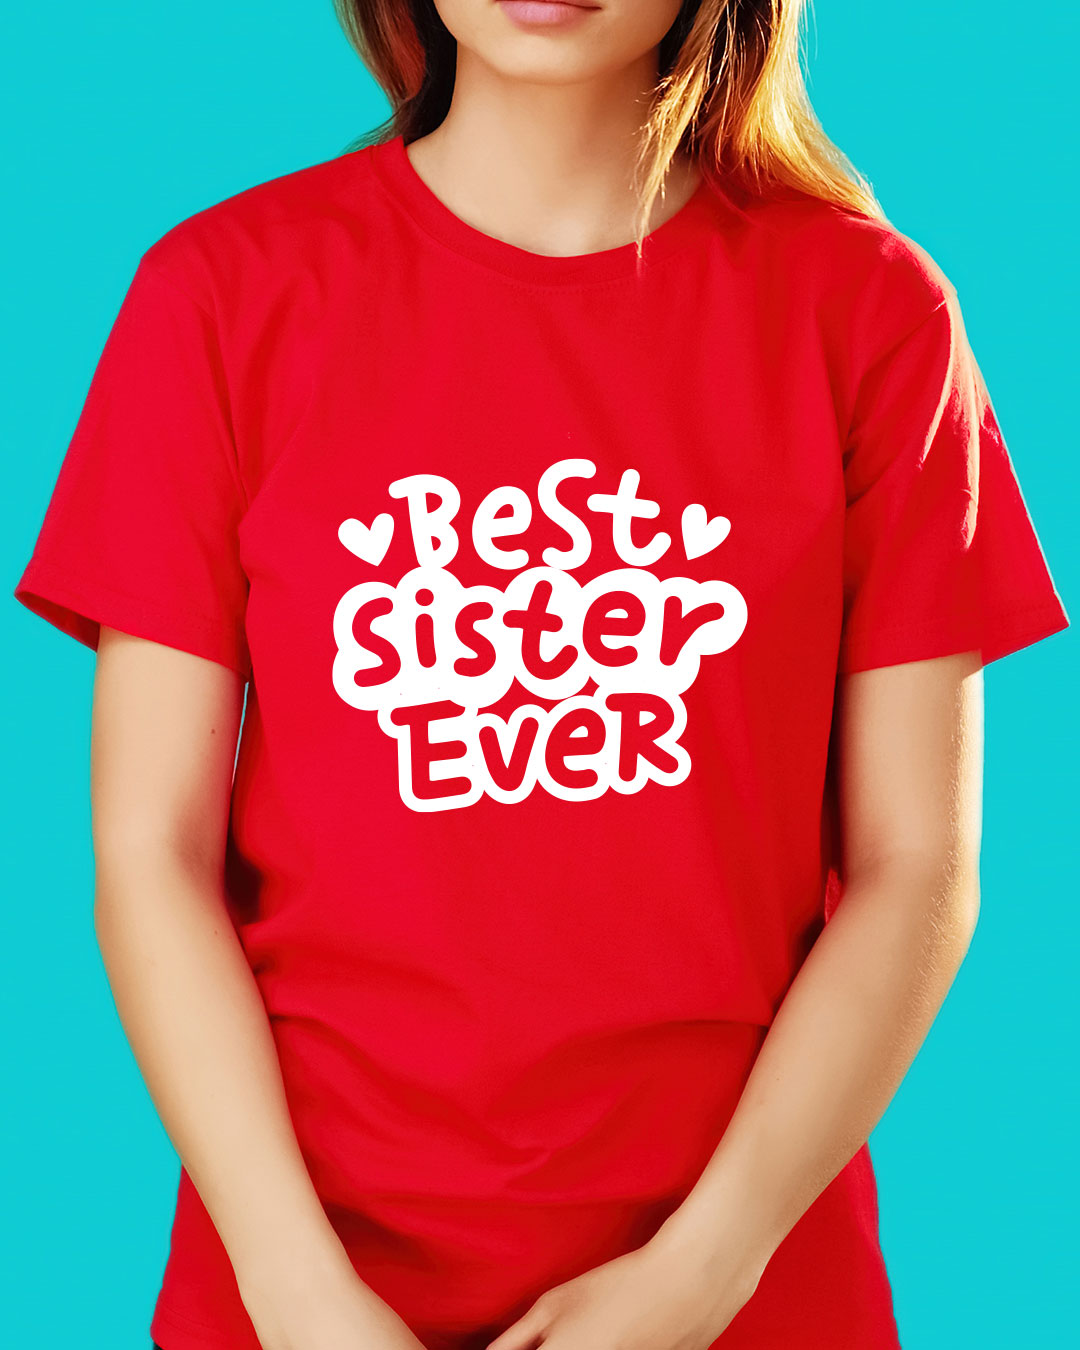 Best Sister Ever - Red T-shirt